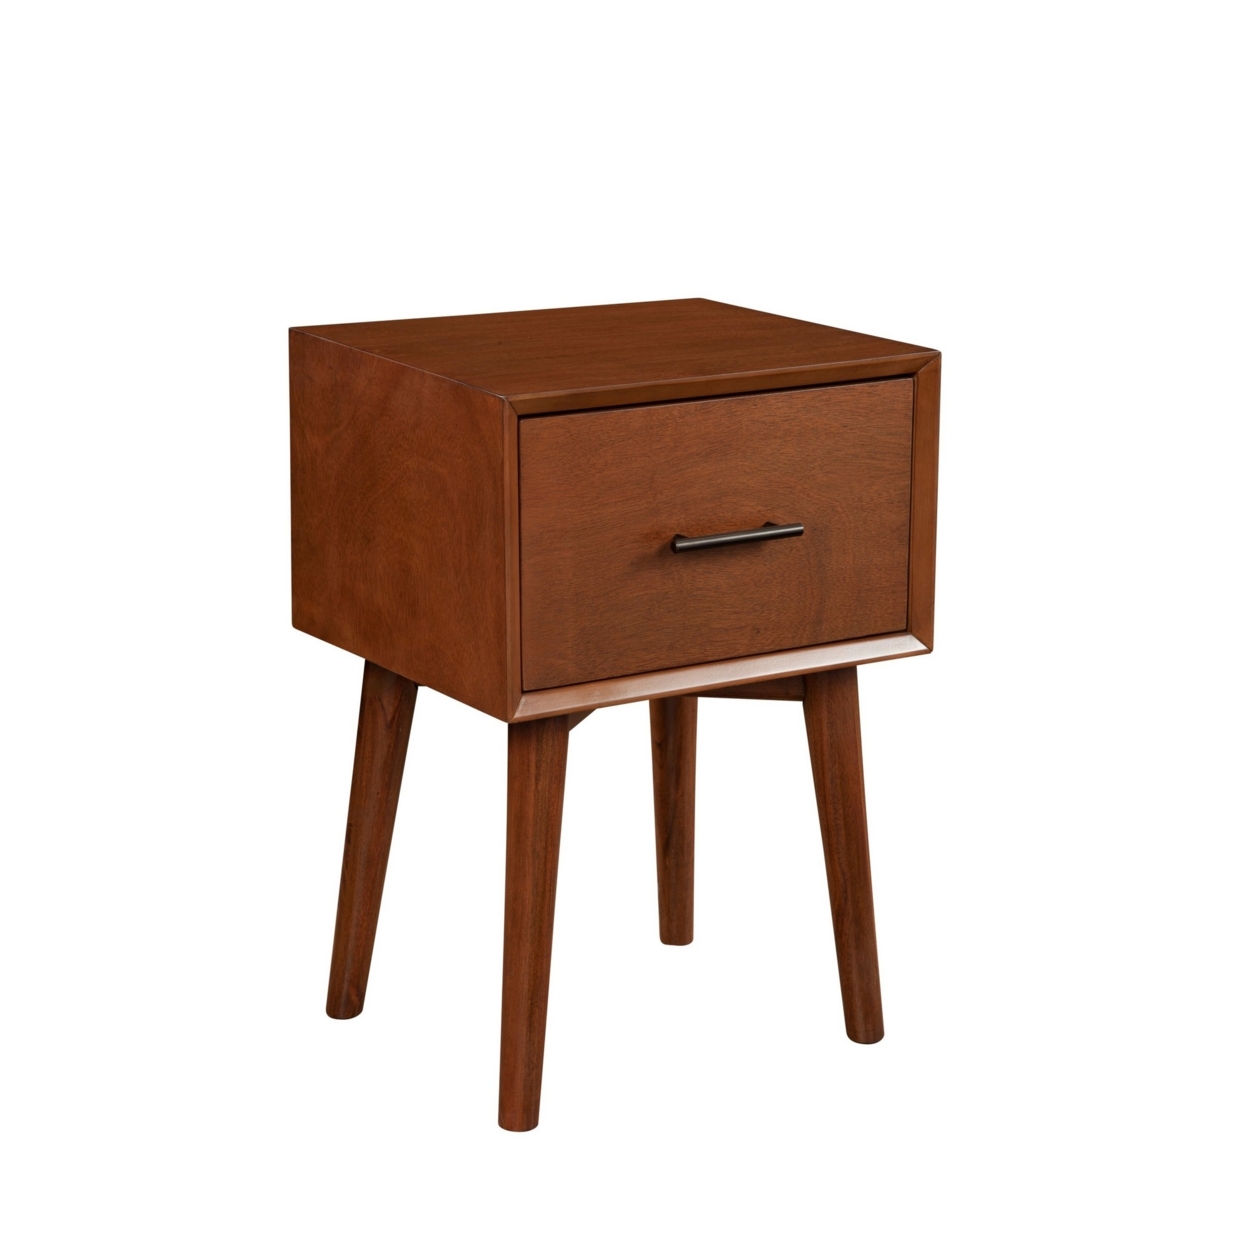 End Table With 1 Drawer And Angled Legs, Brown- Saltoro Sherpi